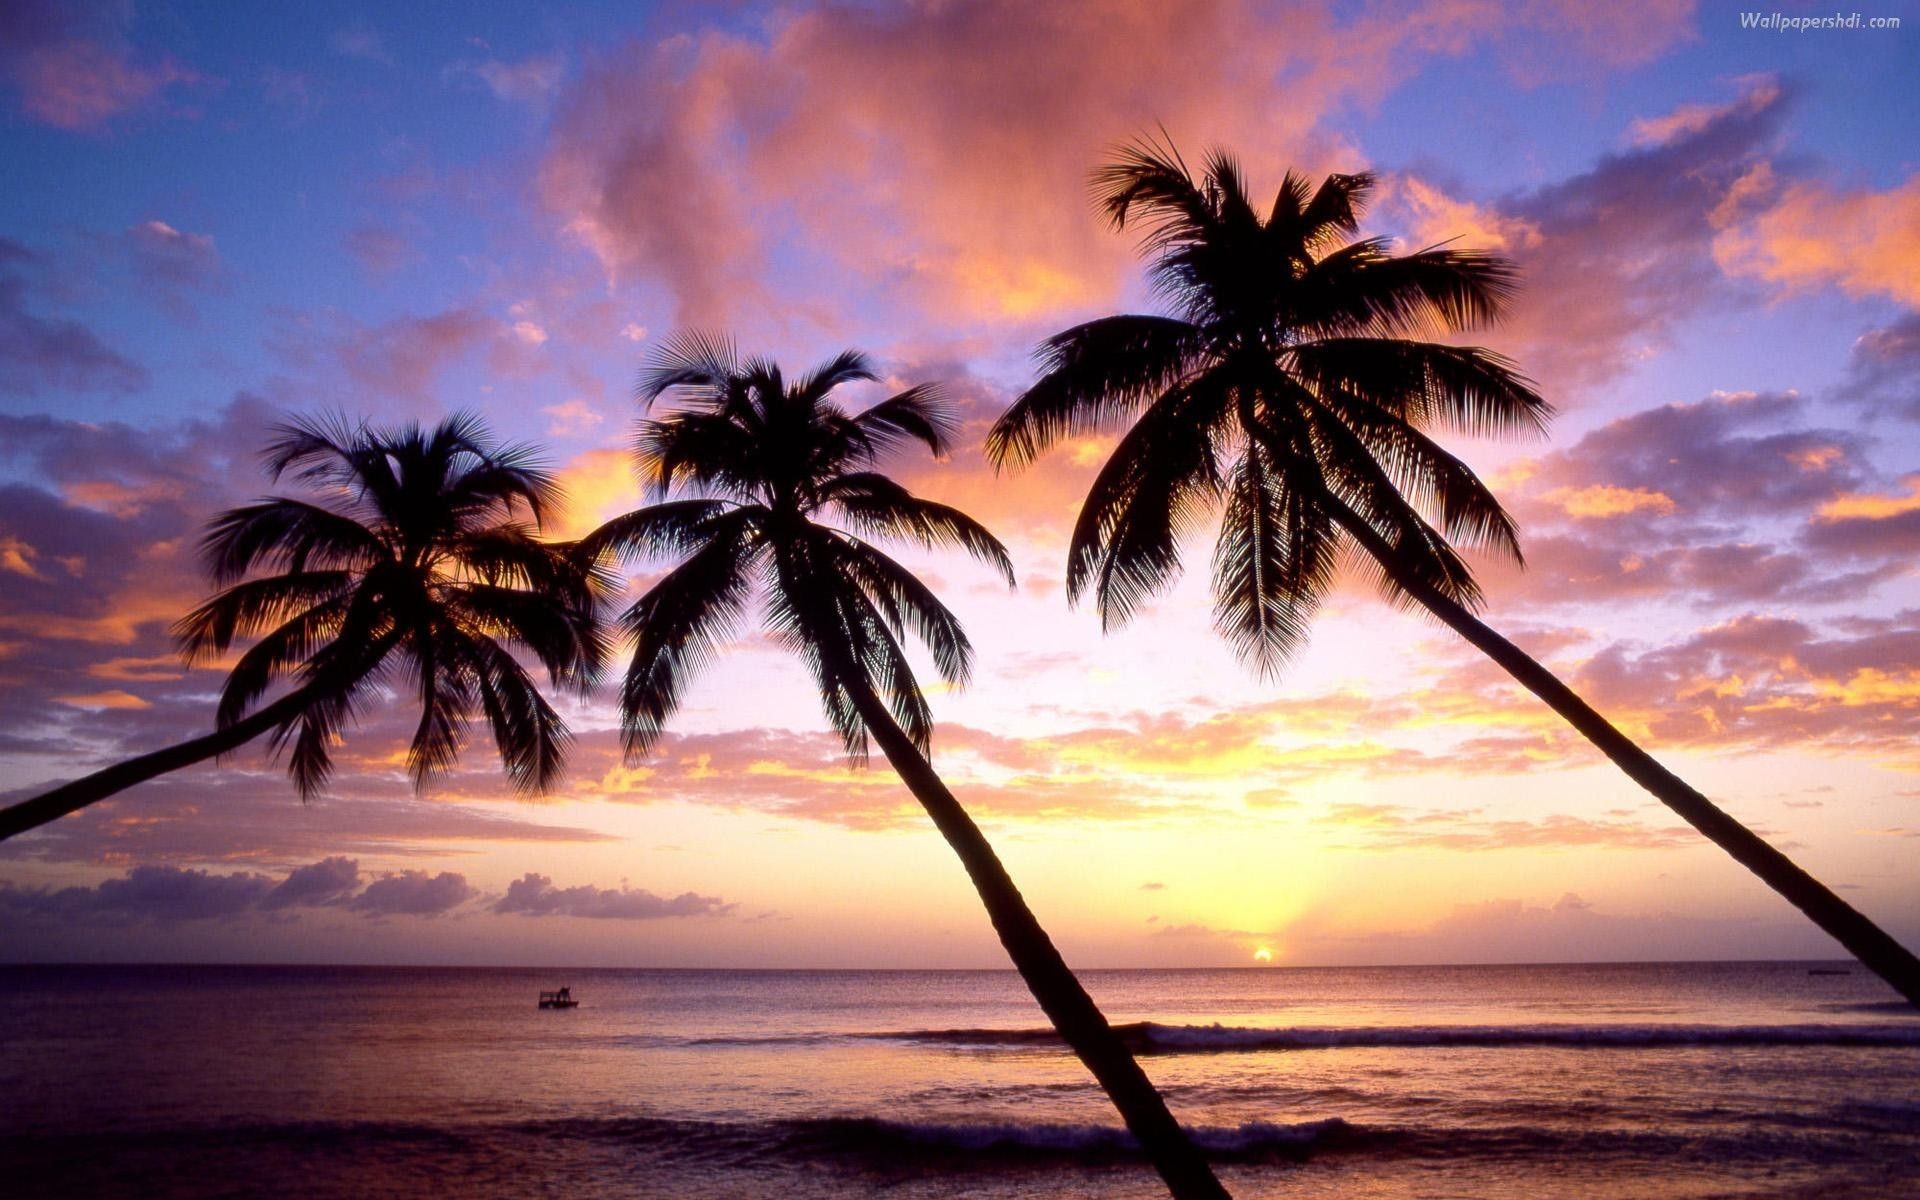 1920x1200 Wallpaper Palm Tree - Android Apps on Google Play